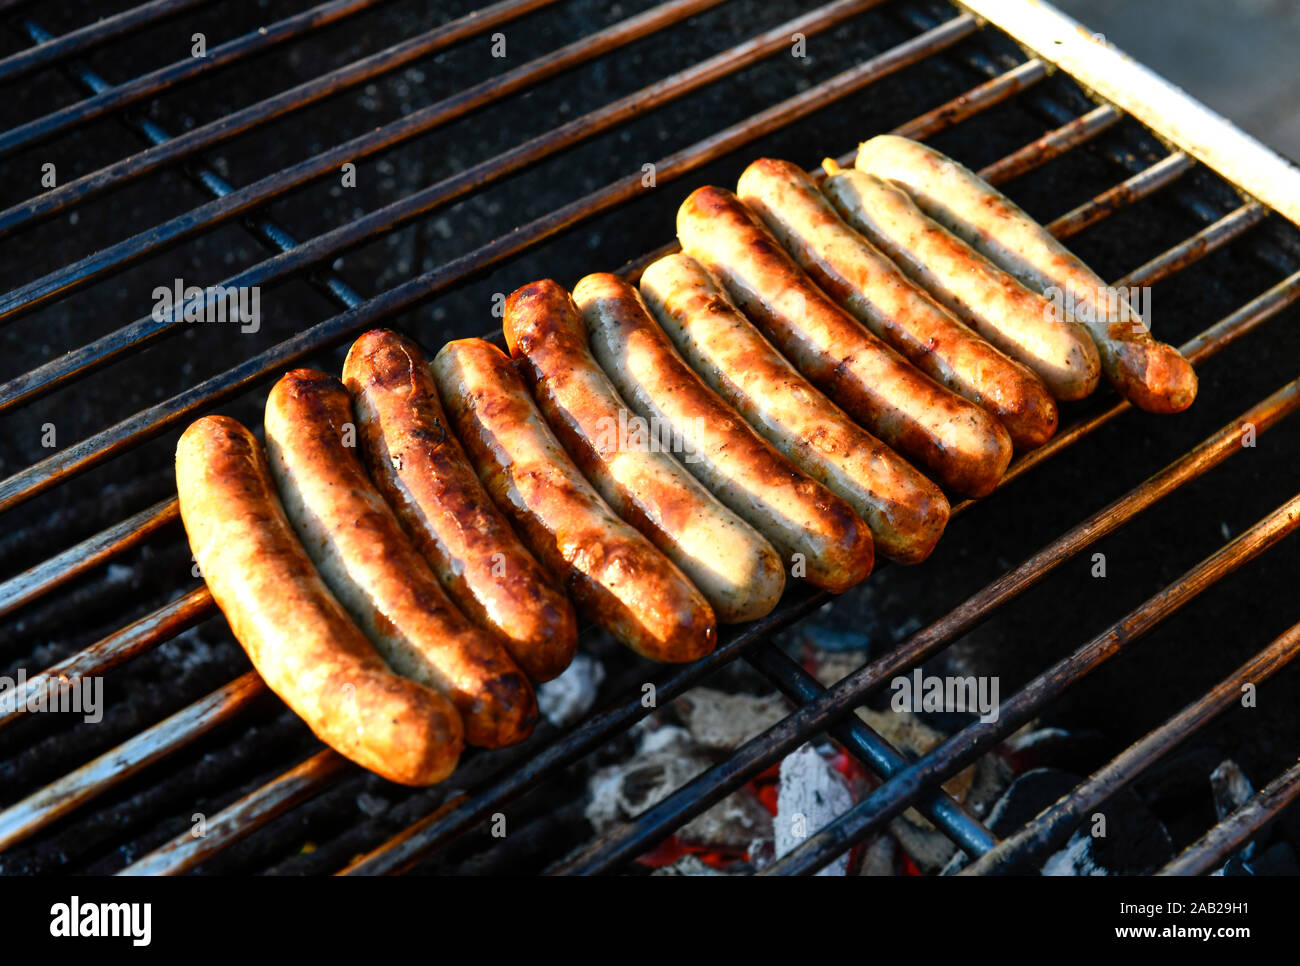 Gegrillte Wurst High Resolution Stock Photography and Images - Alamy